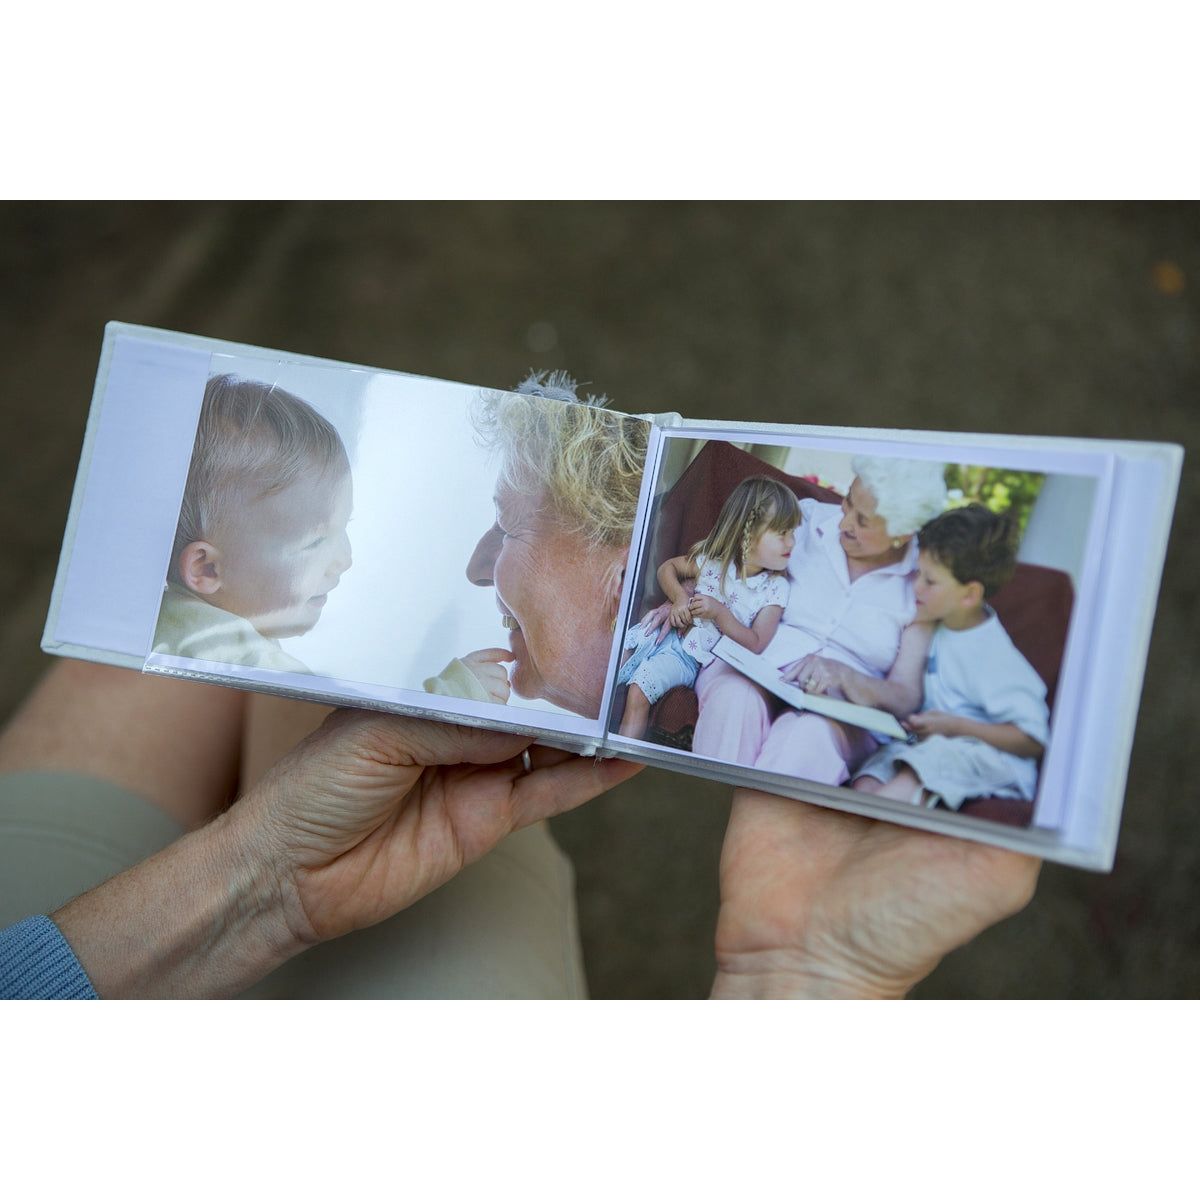 Open photo album being held in hands showing photos in the plastic sleeves.